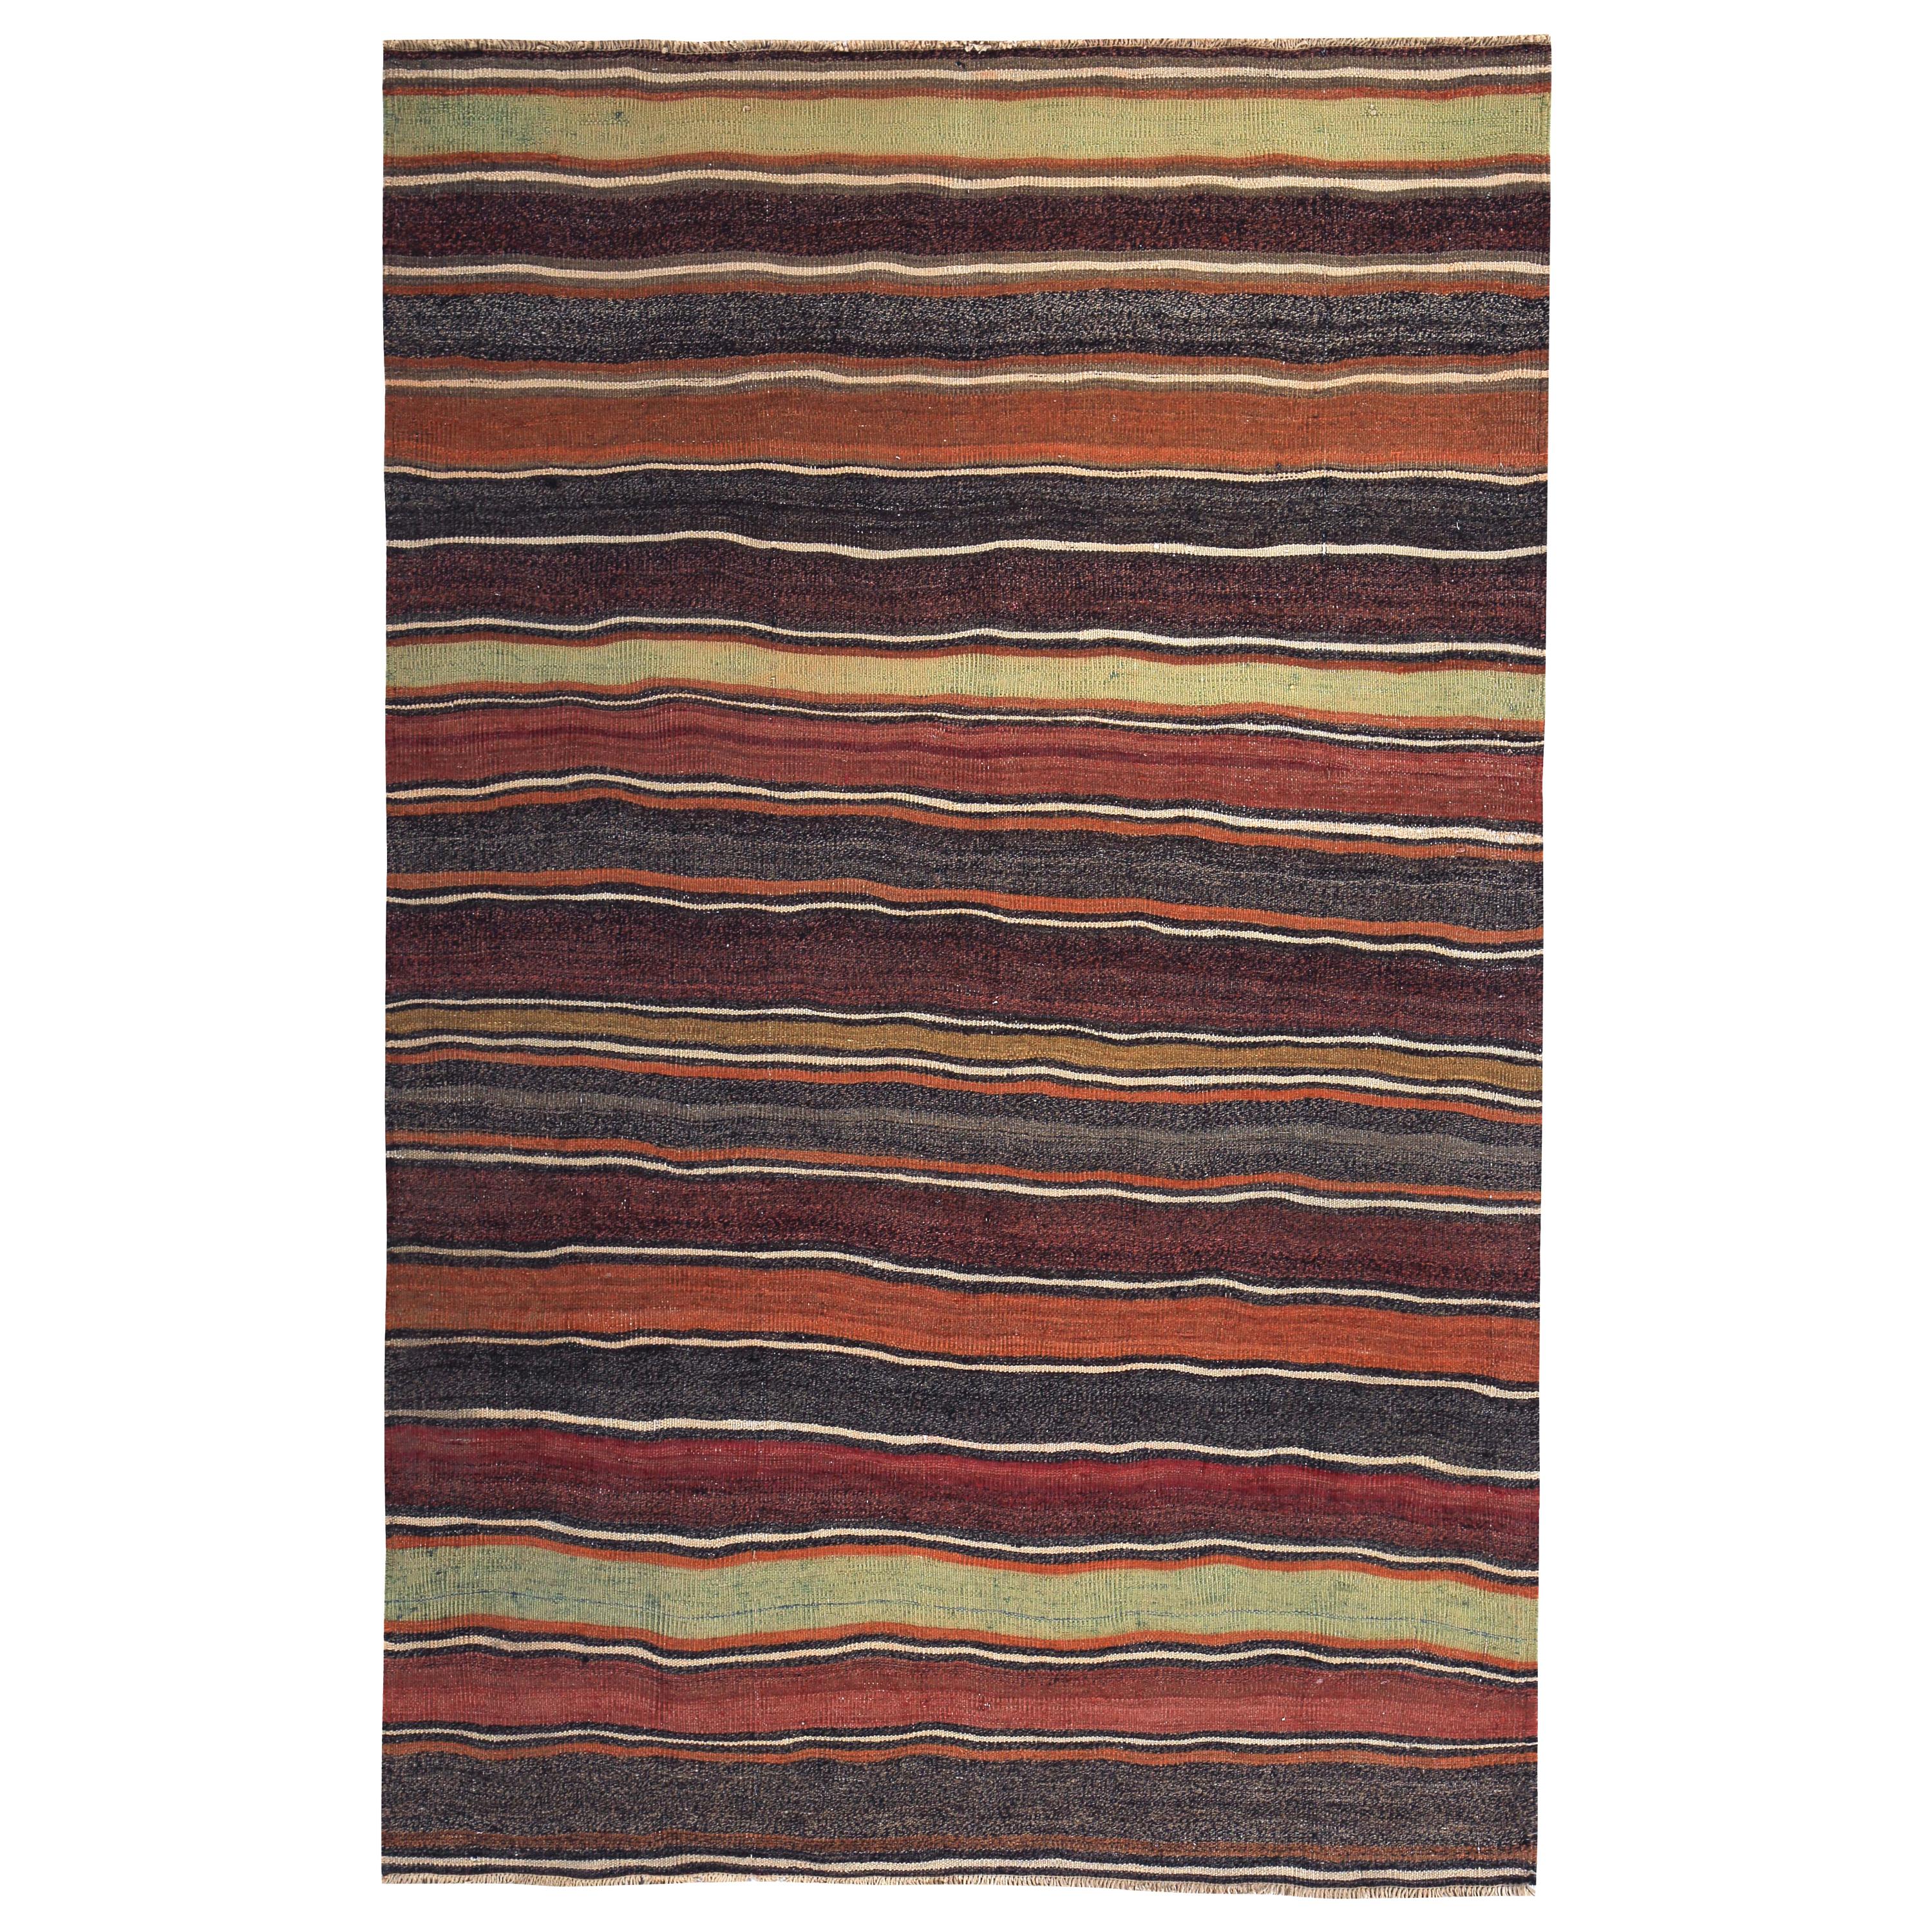 Modern Turkish Kilim Rug with Red, Yellow and Orange Stripes on a Brown Field